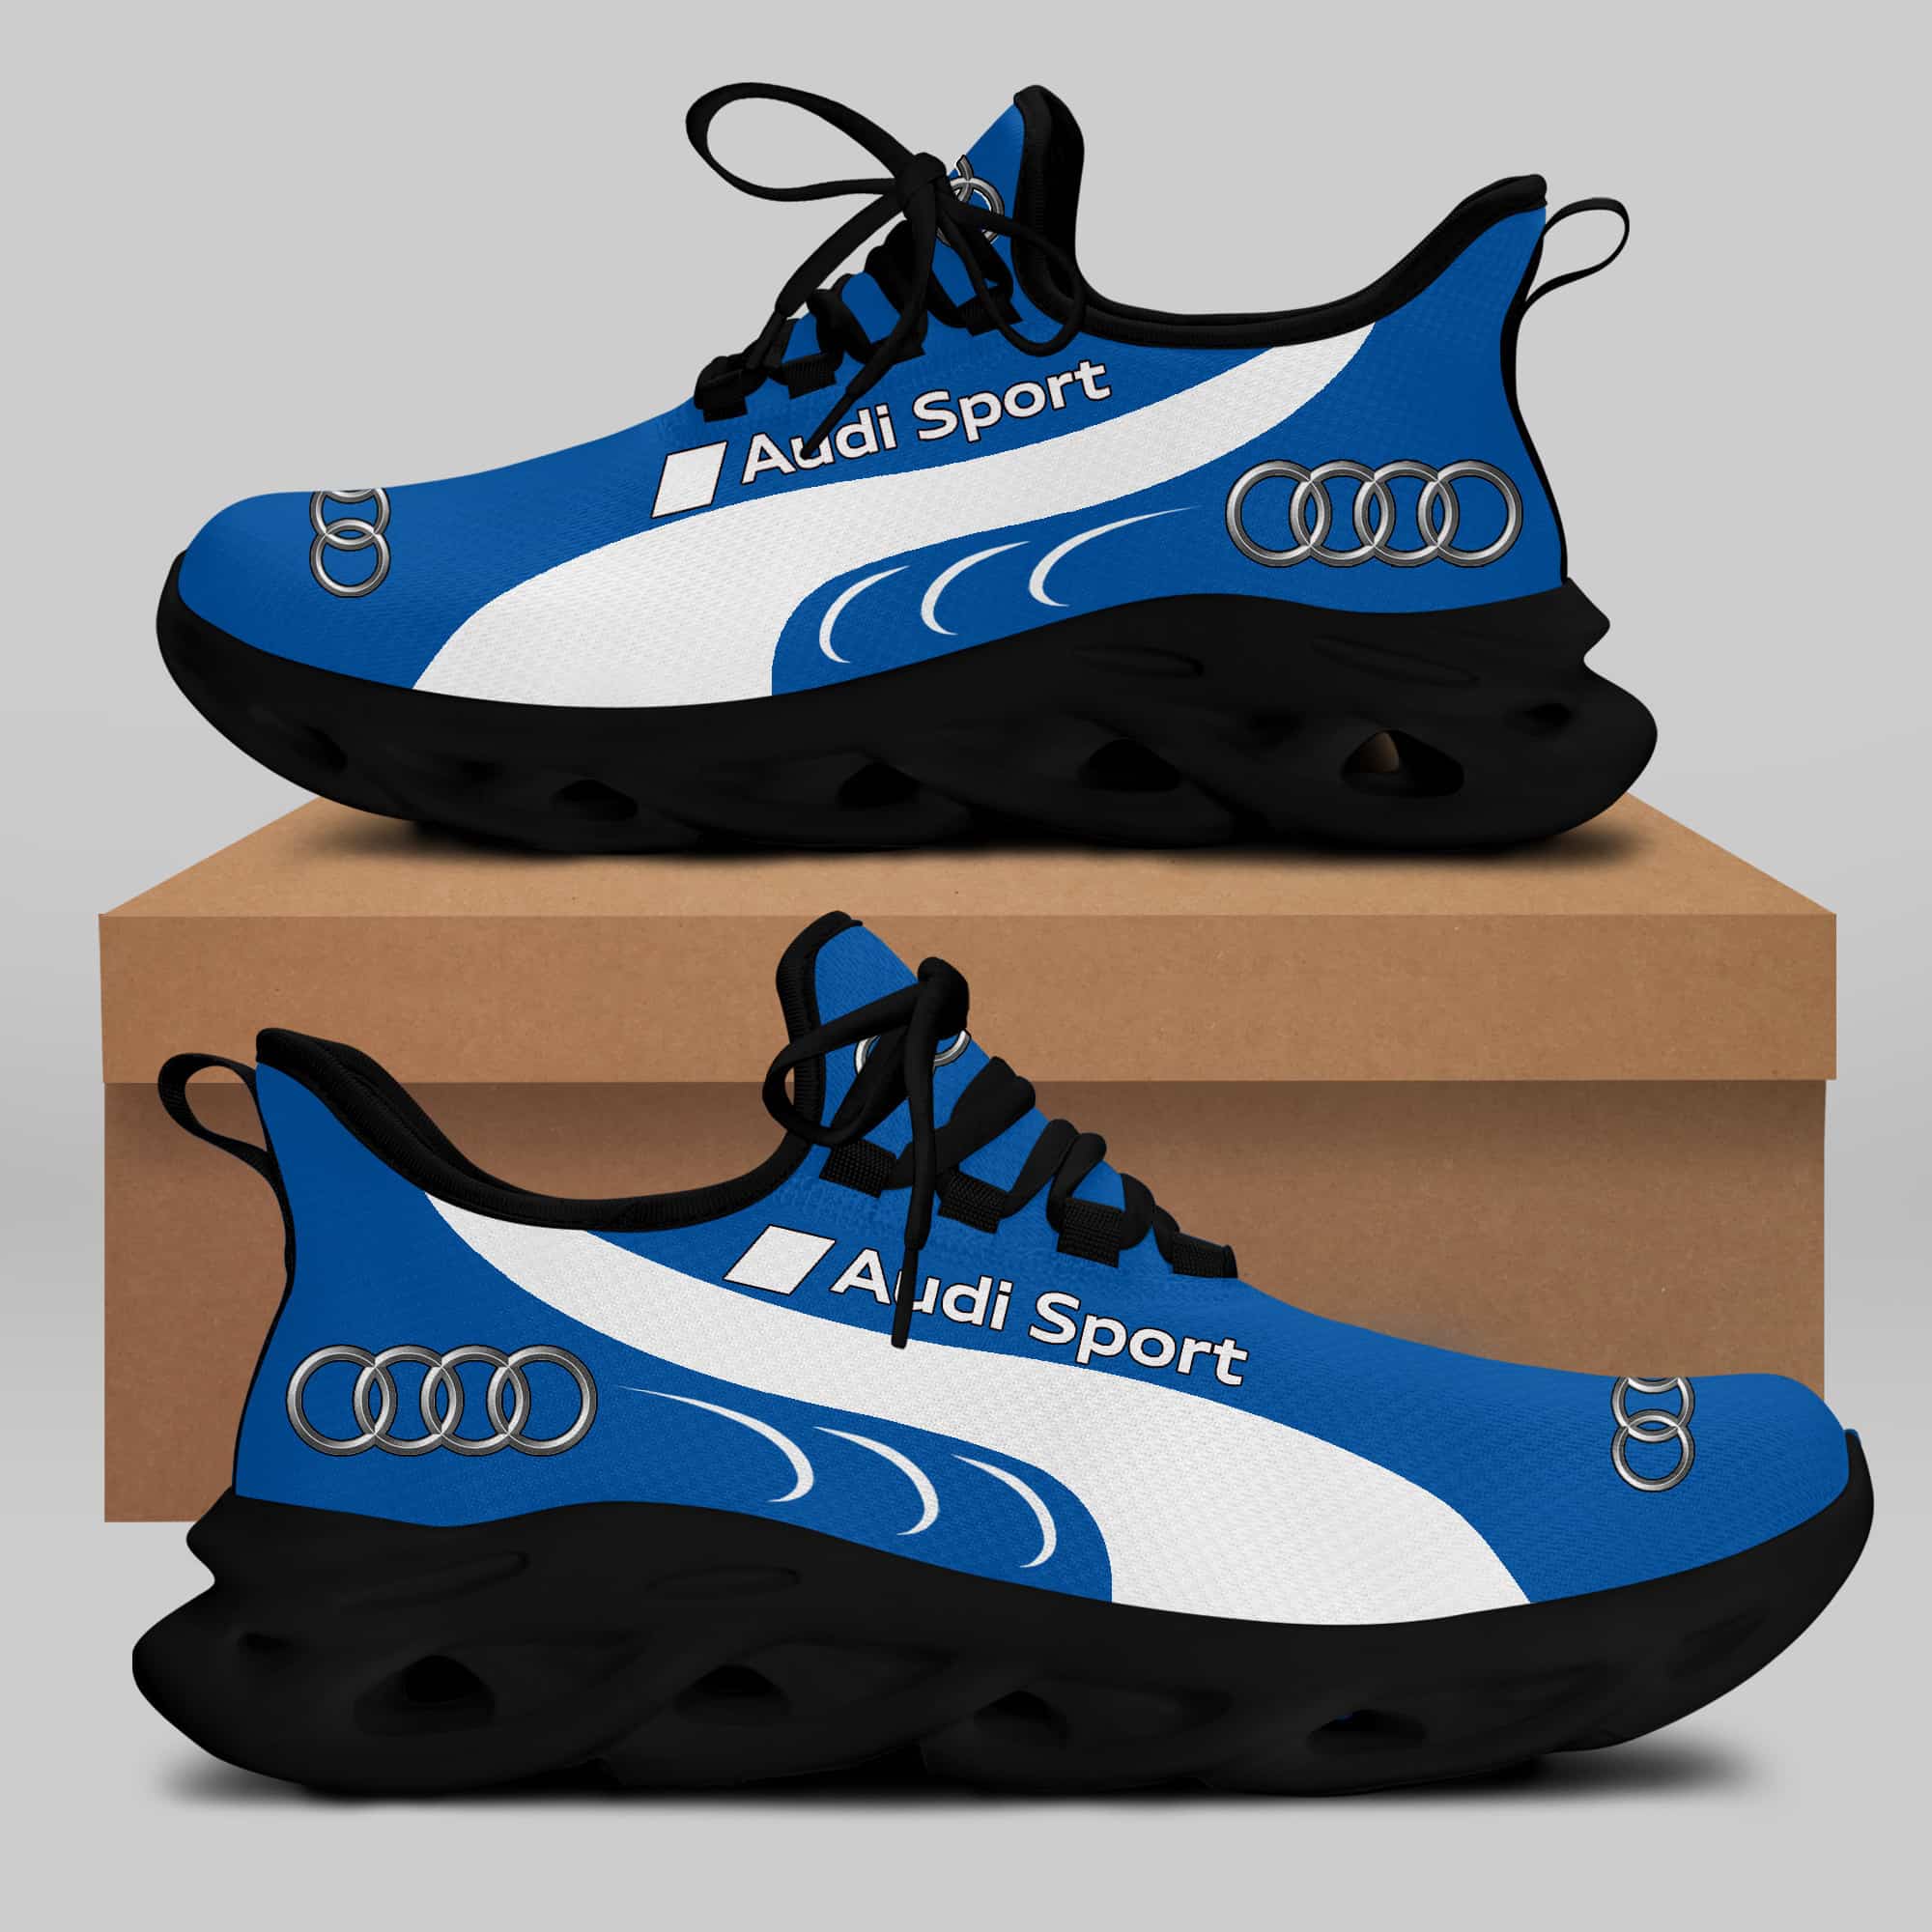 Audi Sport Running Shoes Max Soul Shoes Sneakers Ver 5 2